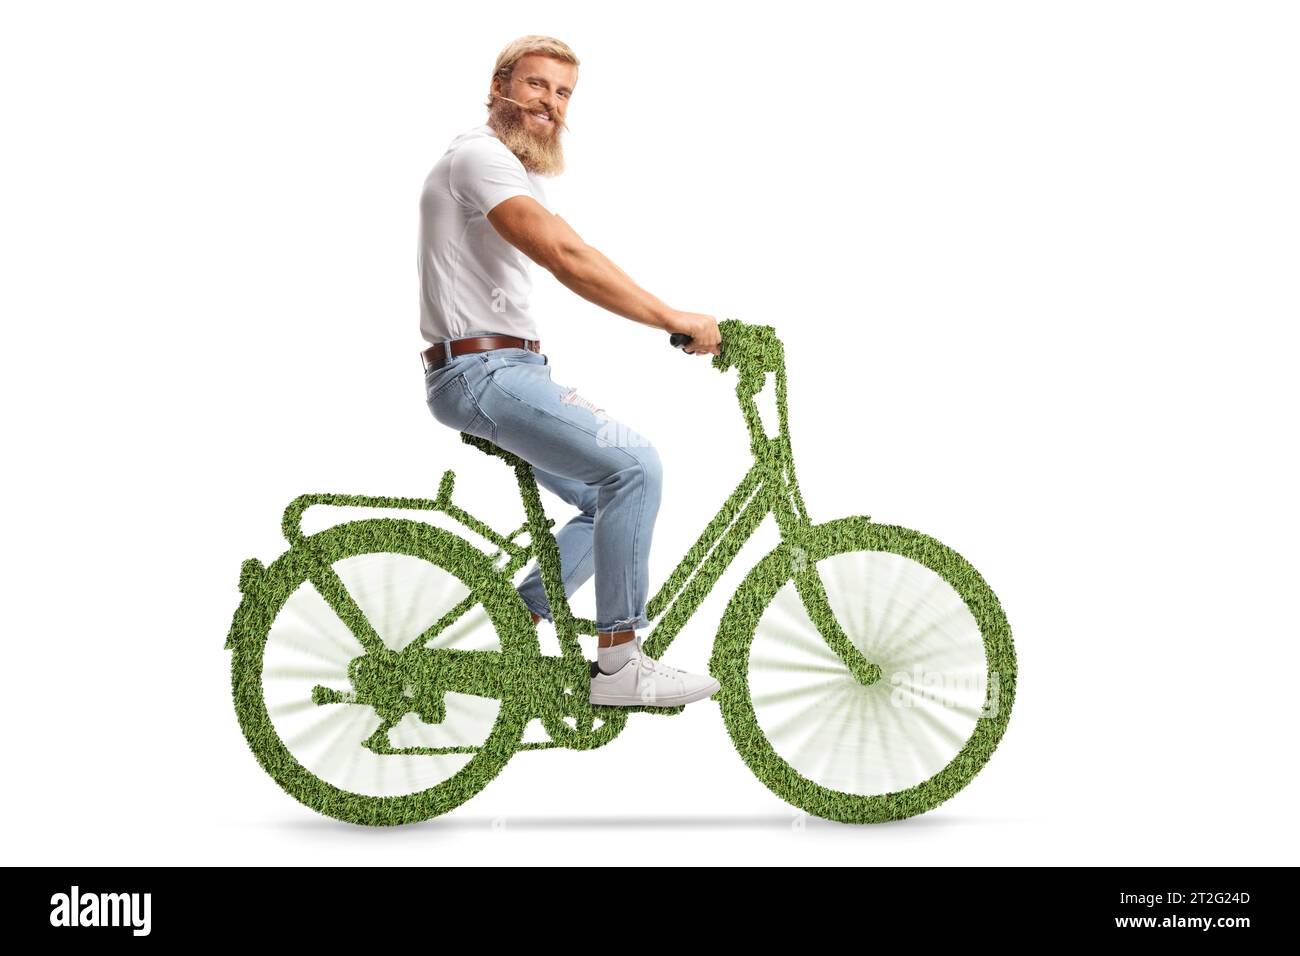 Bearded guy with moustaches riding a green eco bicycle and smiling at camera isolated on white background Stock Photo